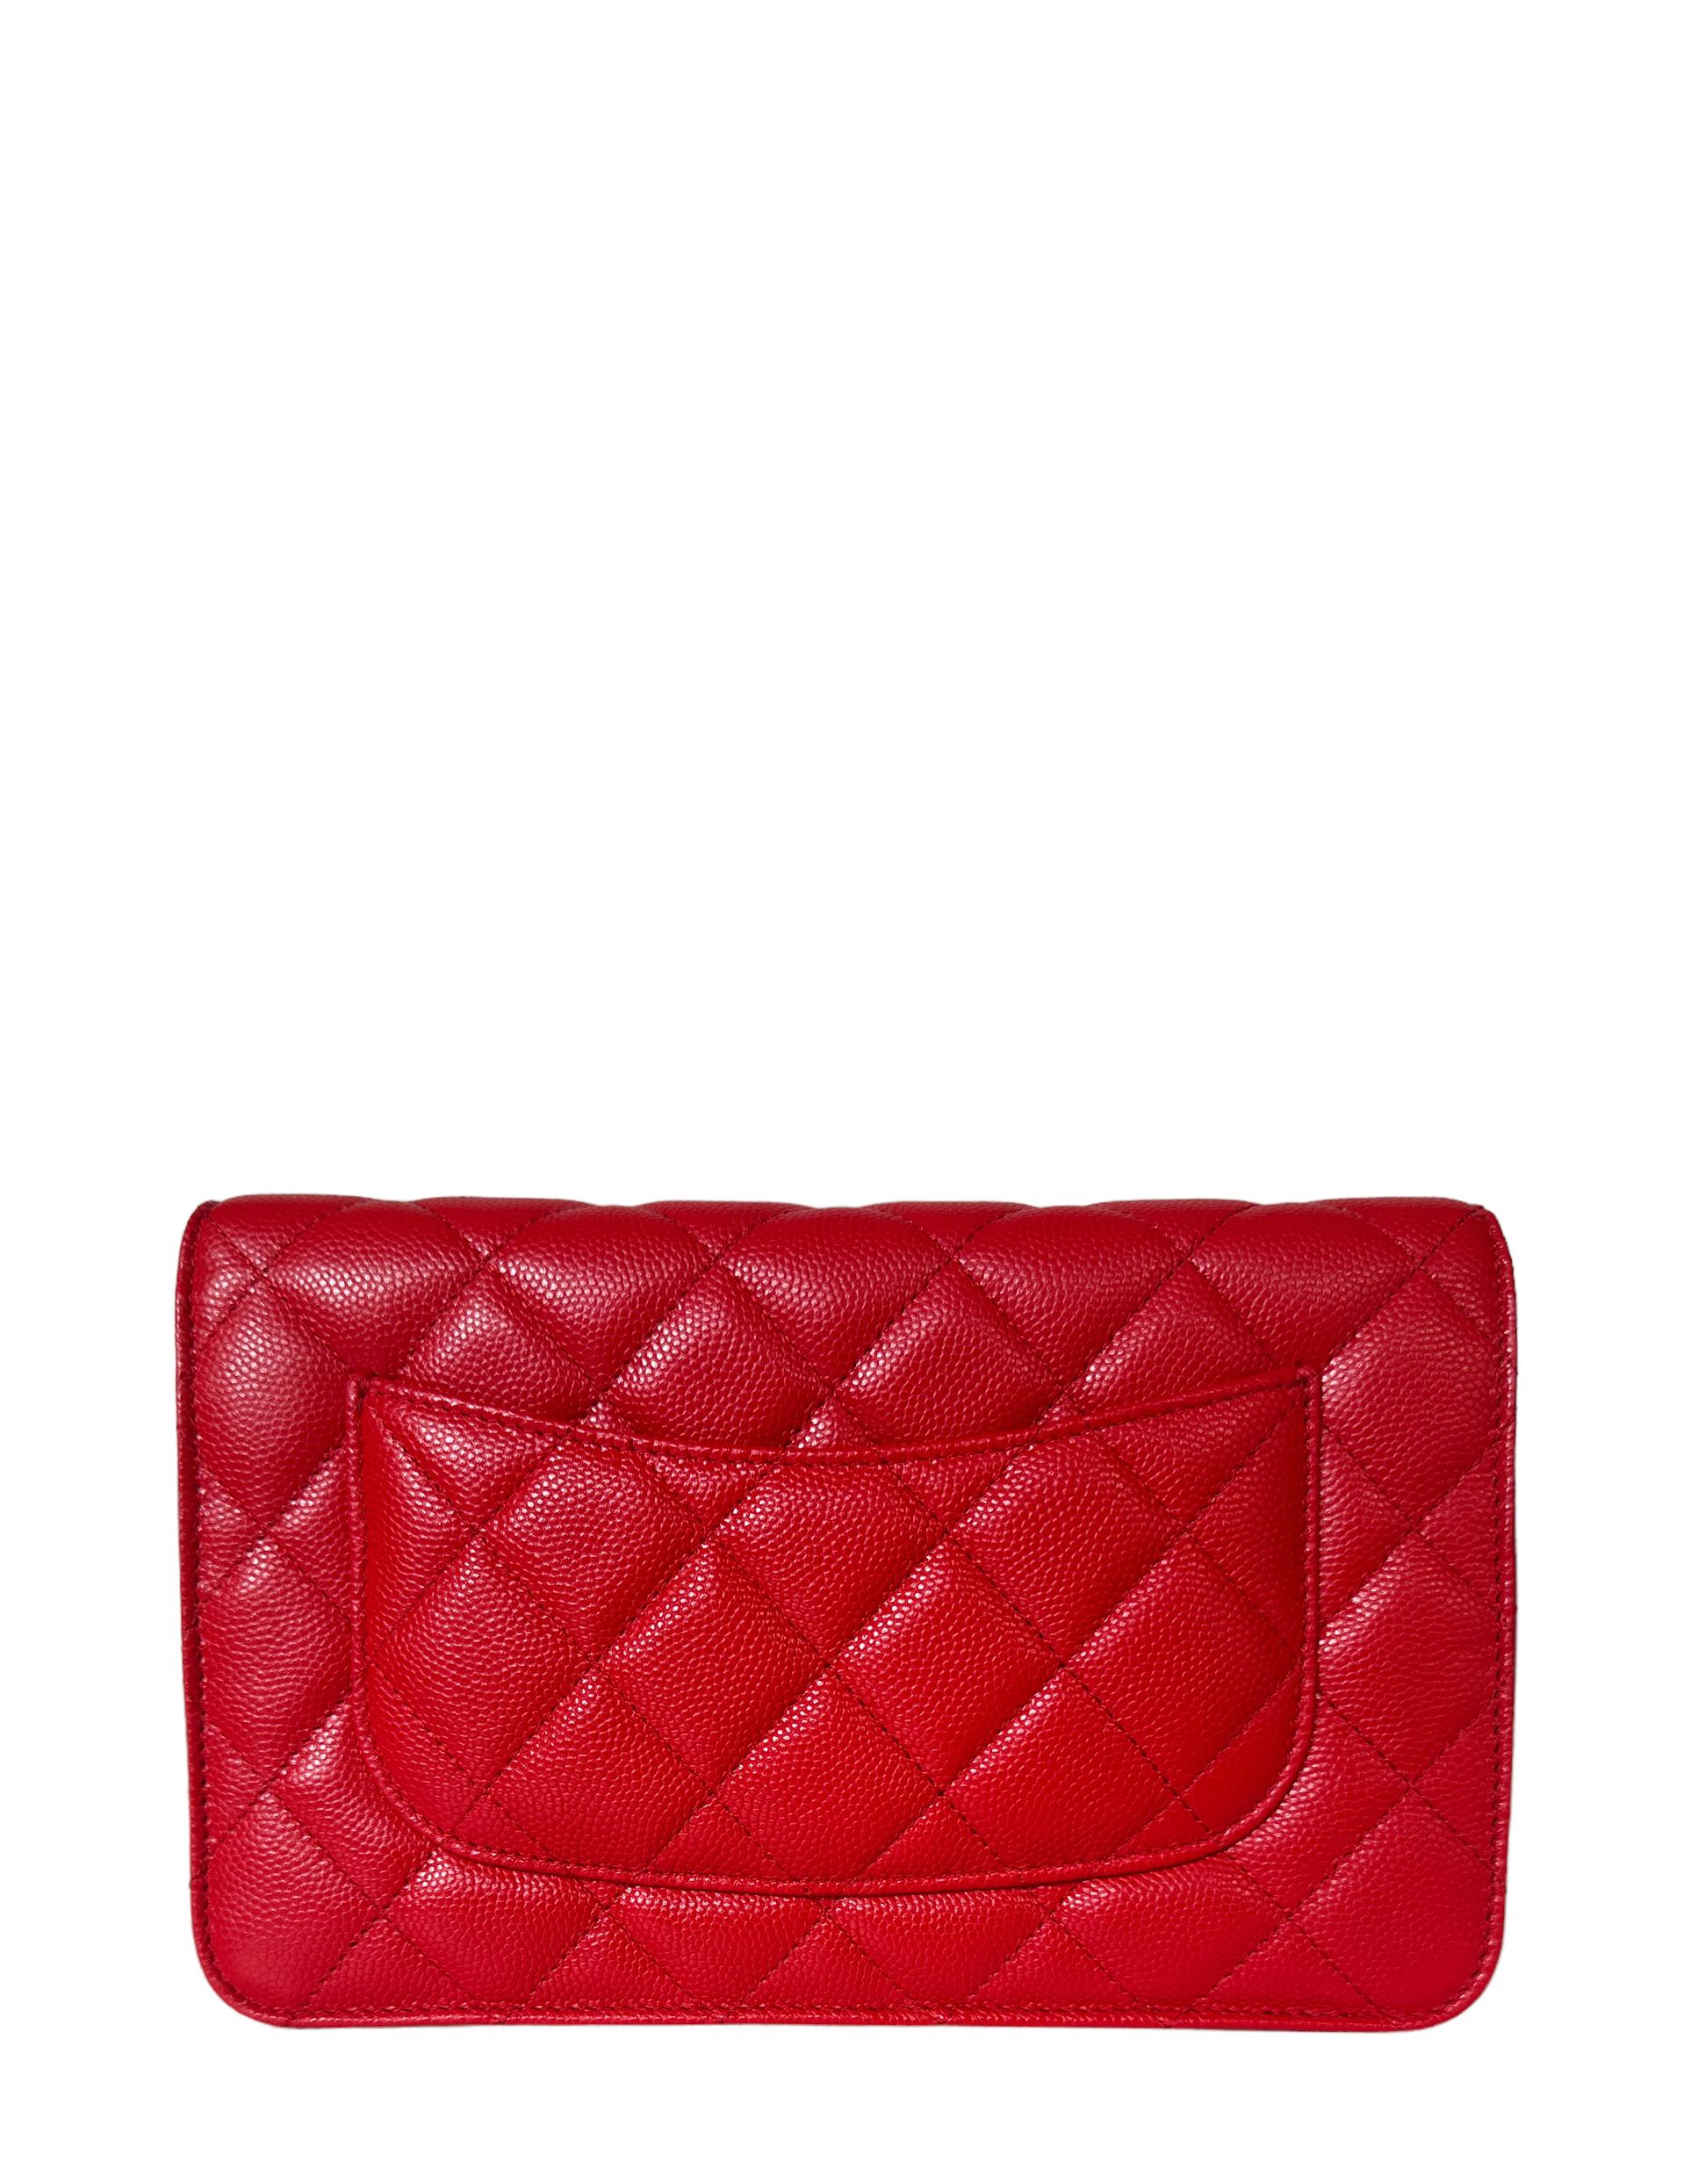 Chanel NEW Red Quilted Caviar Leather Wallet On Chain WOC Crossbody Bag. Chain can be tucked inside bag to also be worn as a clutch. 
Made In: France
Year of Production: 2022
Color: Red
Hardware: Light goldtone
Materials: Caviar leather
Lining: Red